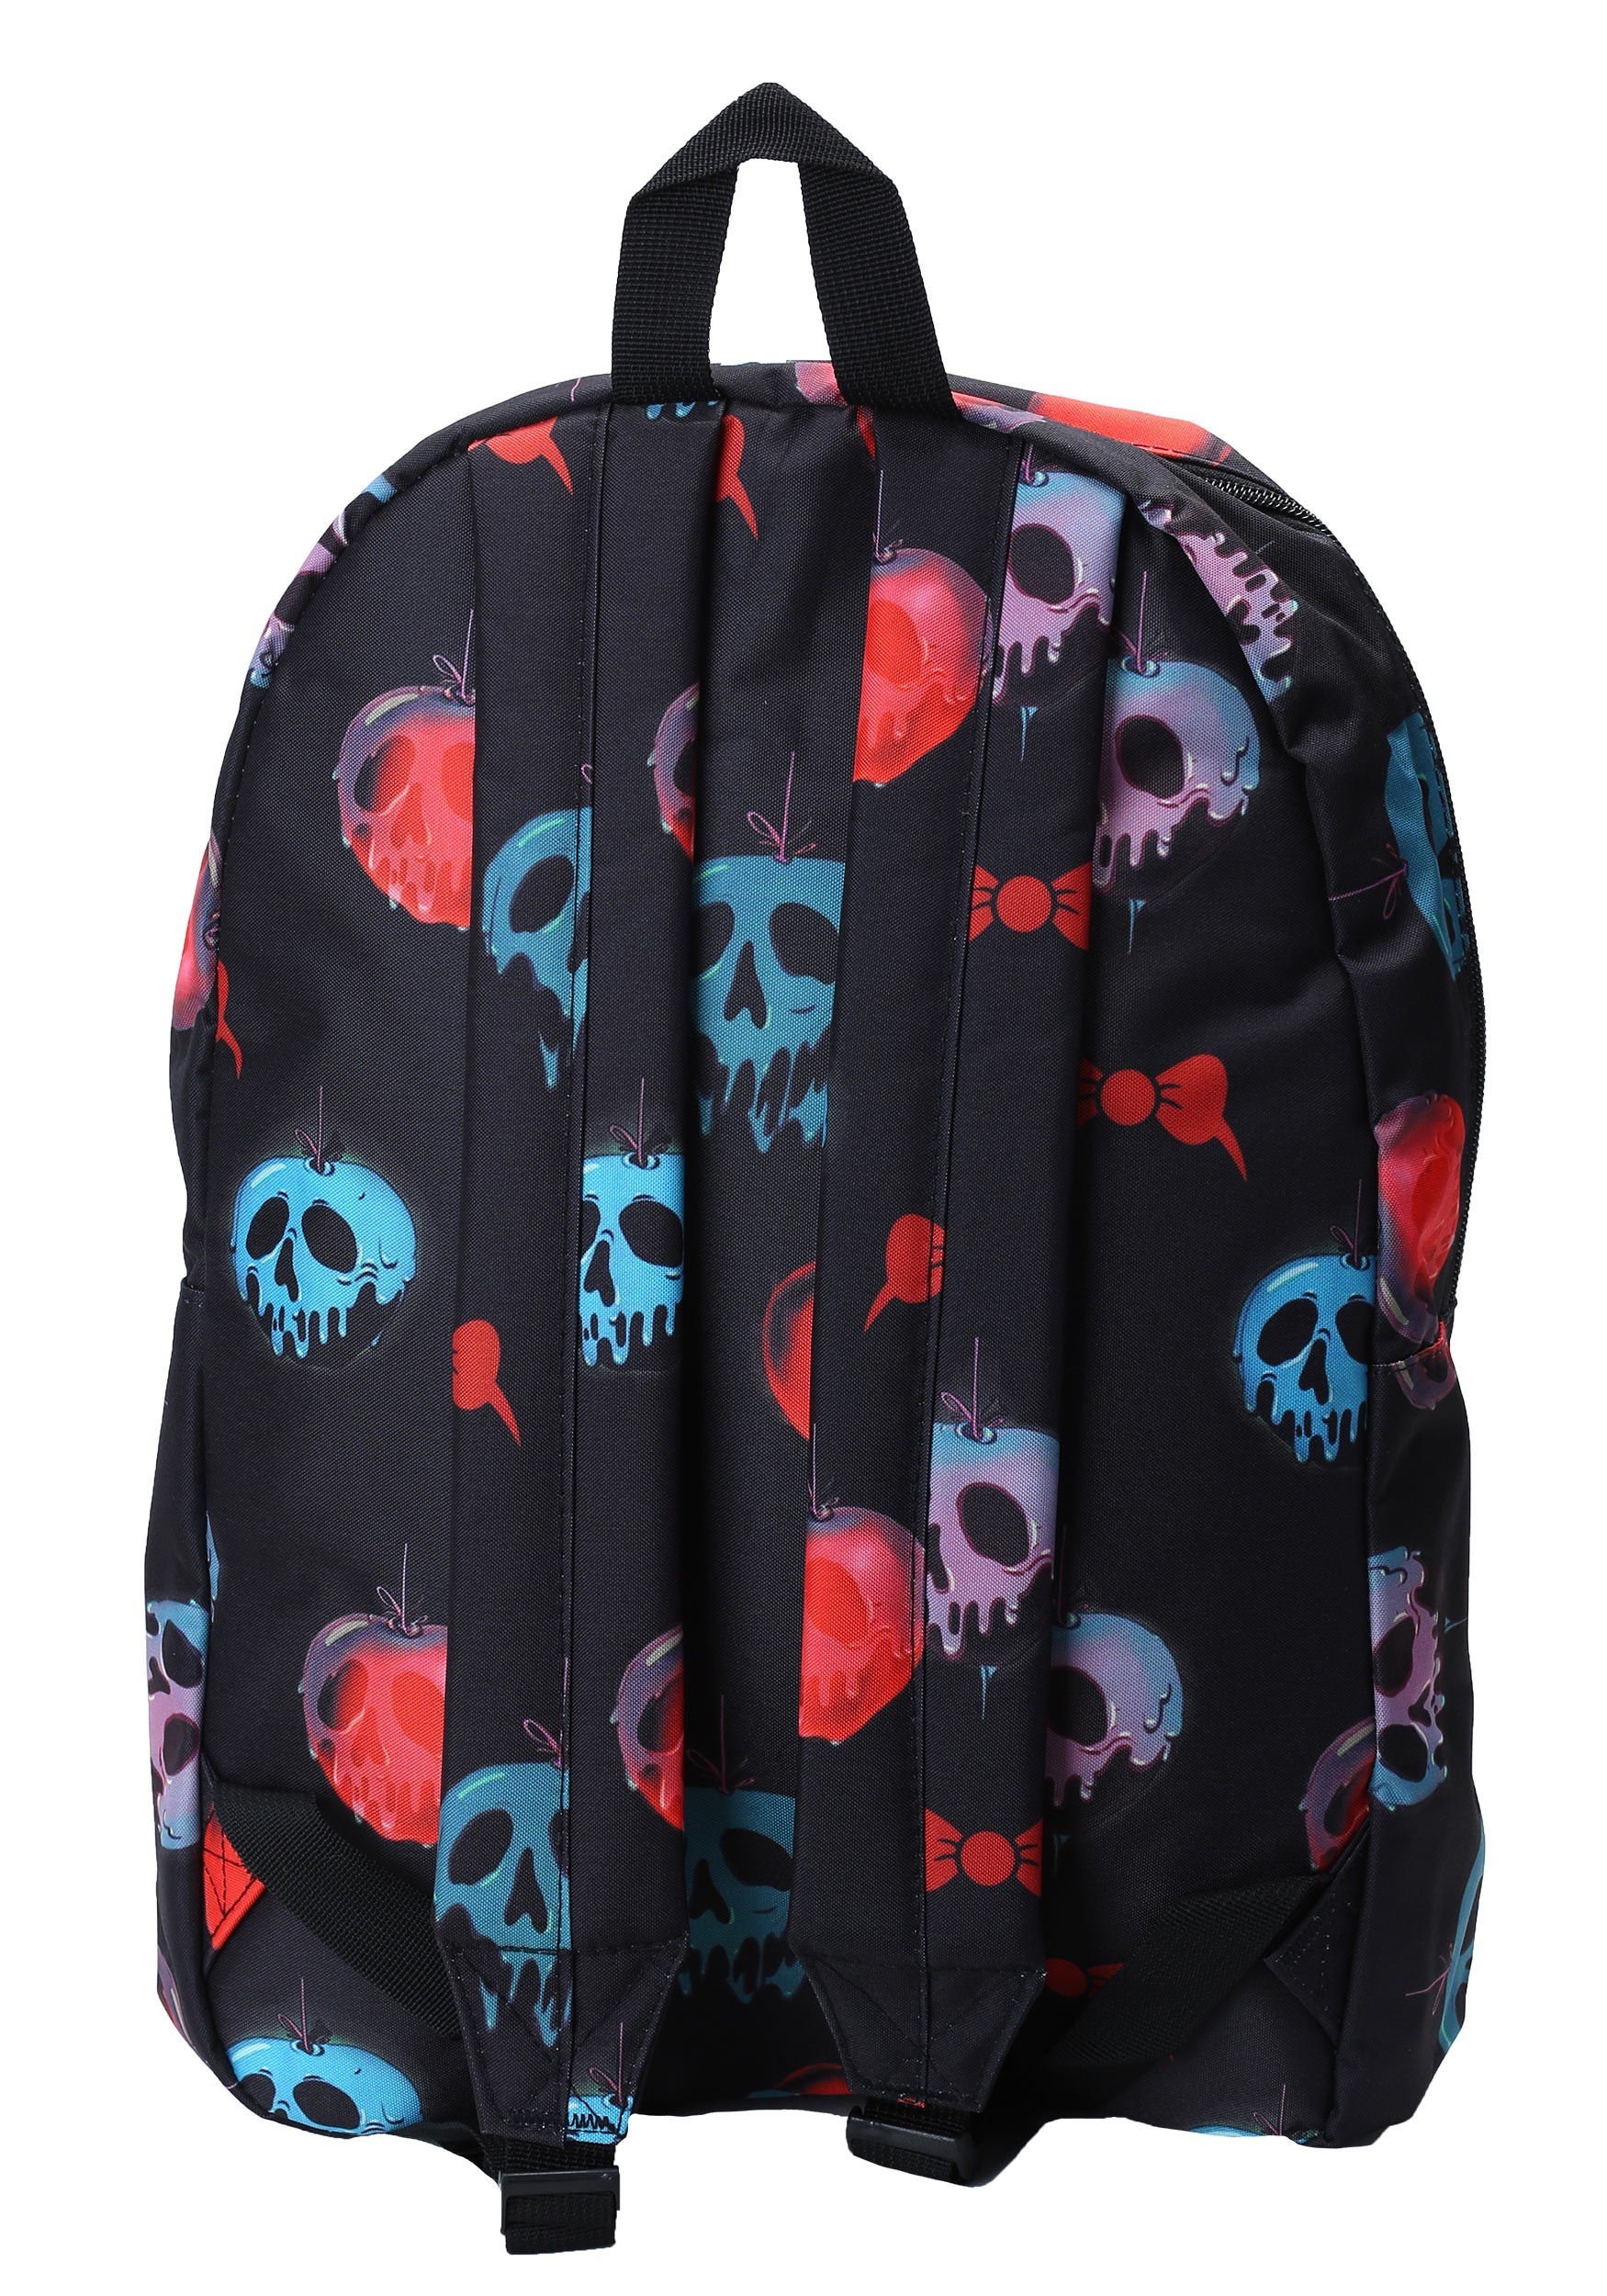 Snow White Apple Death Backpack